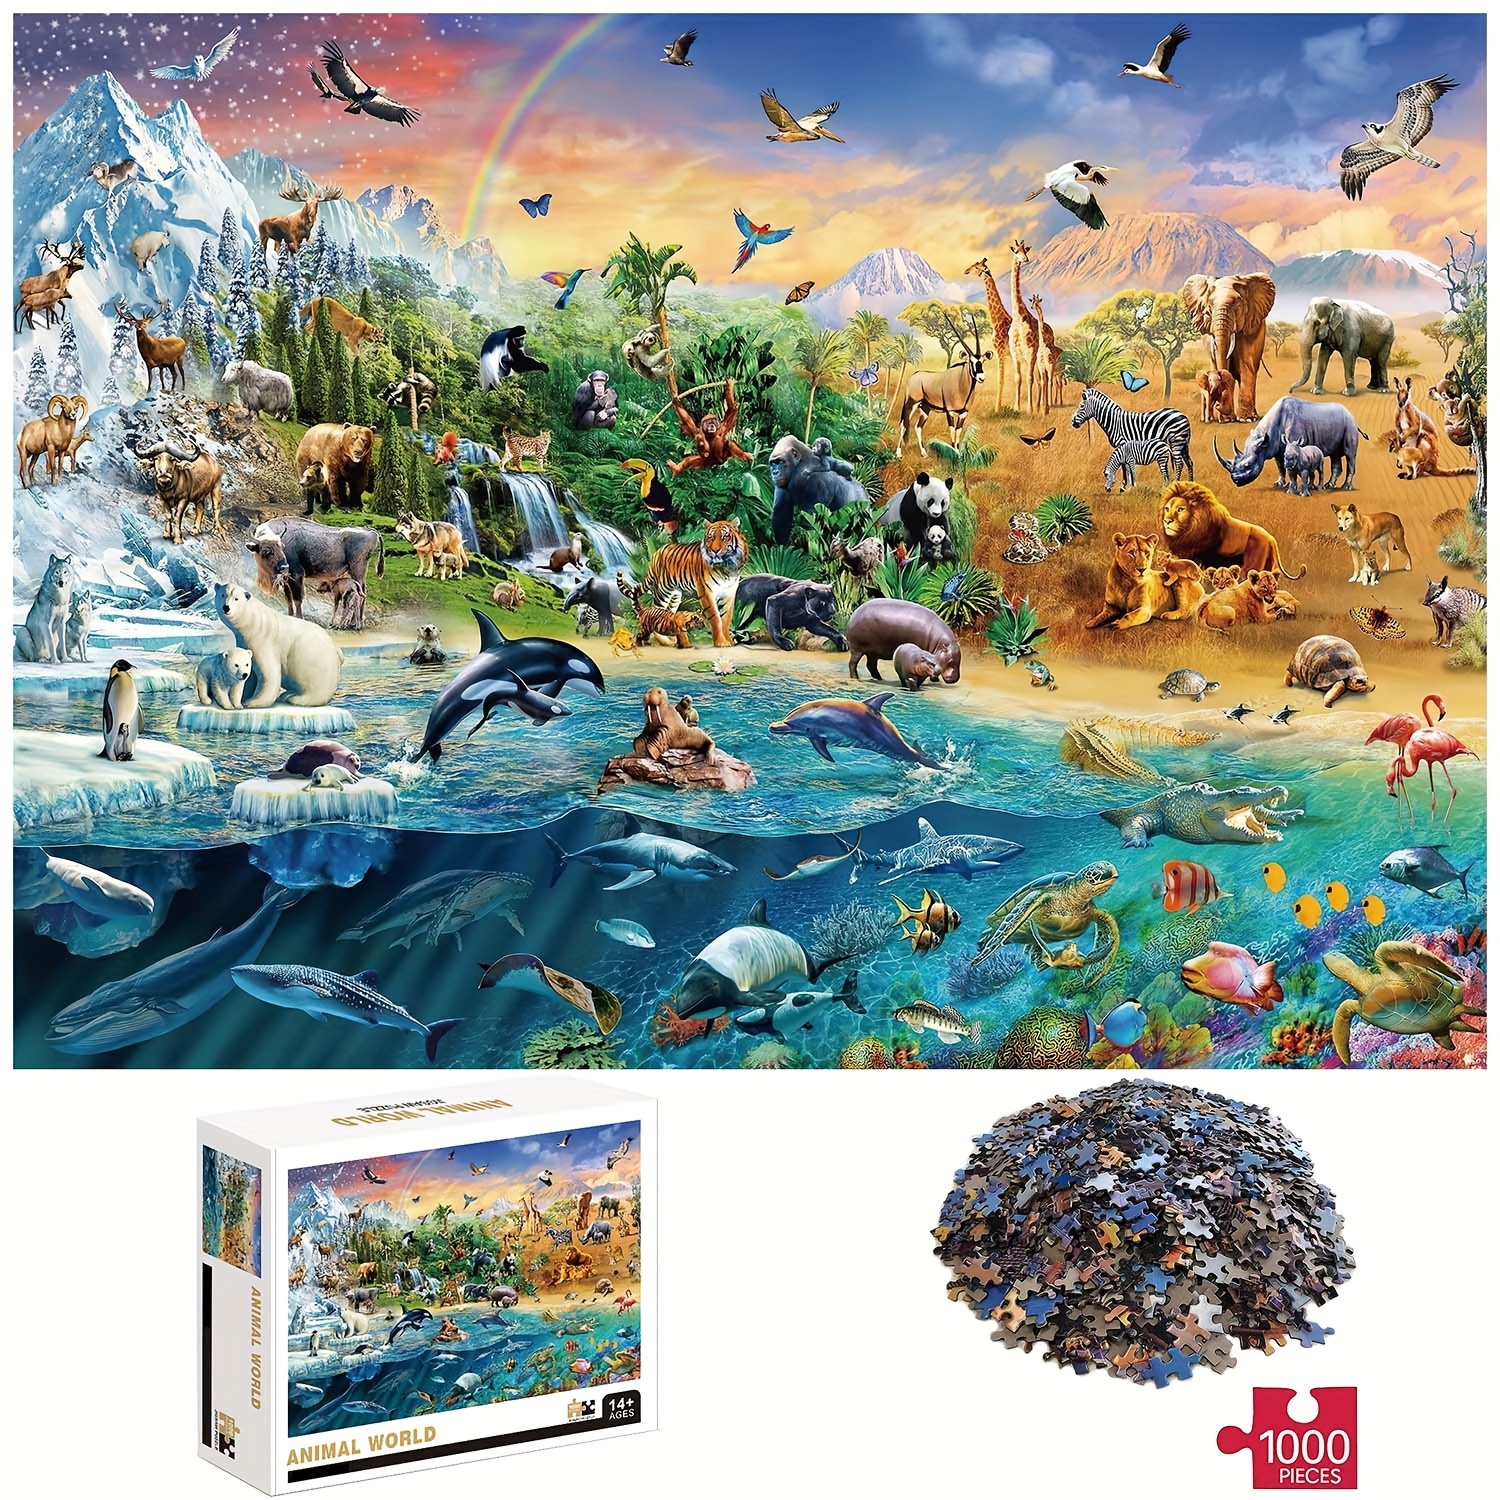 

1000pcs Animal World Puzzles, Thick And Durable Seamless Jigsaw Puzzles For Adults Fun Family Challenging Puzzles For Birthday, Christmas, Halloween, Thanksgiving, Easter